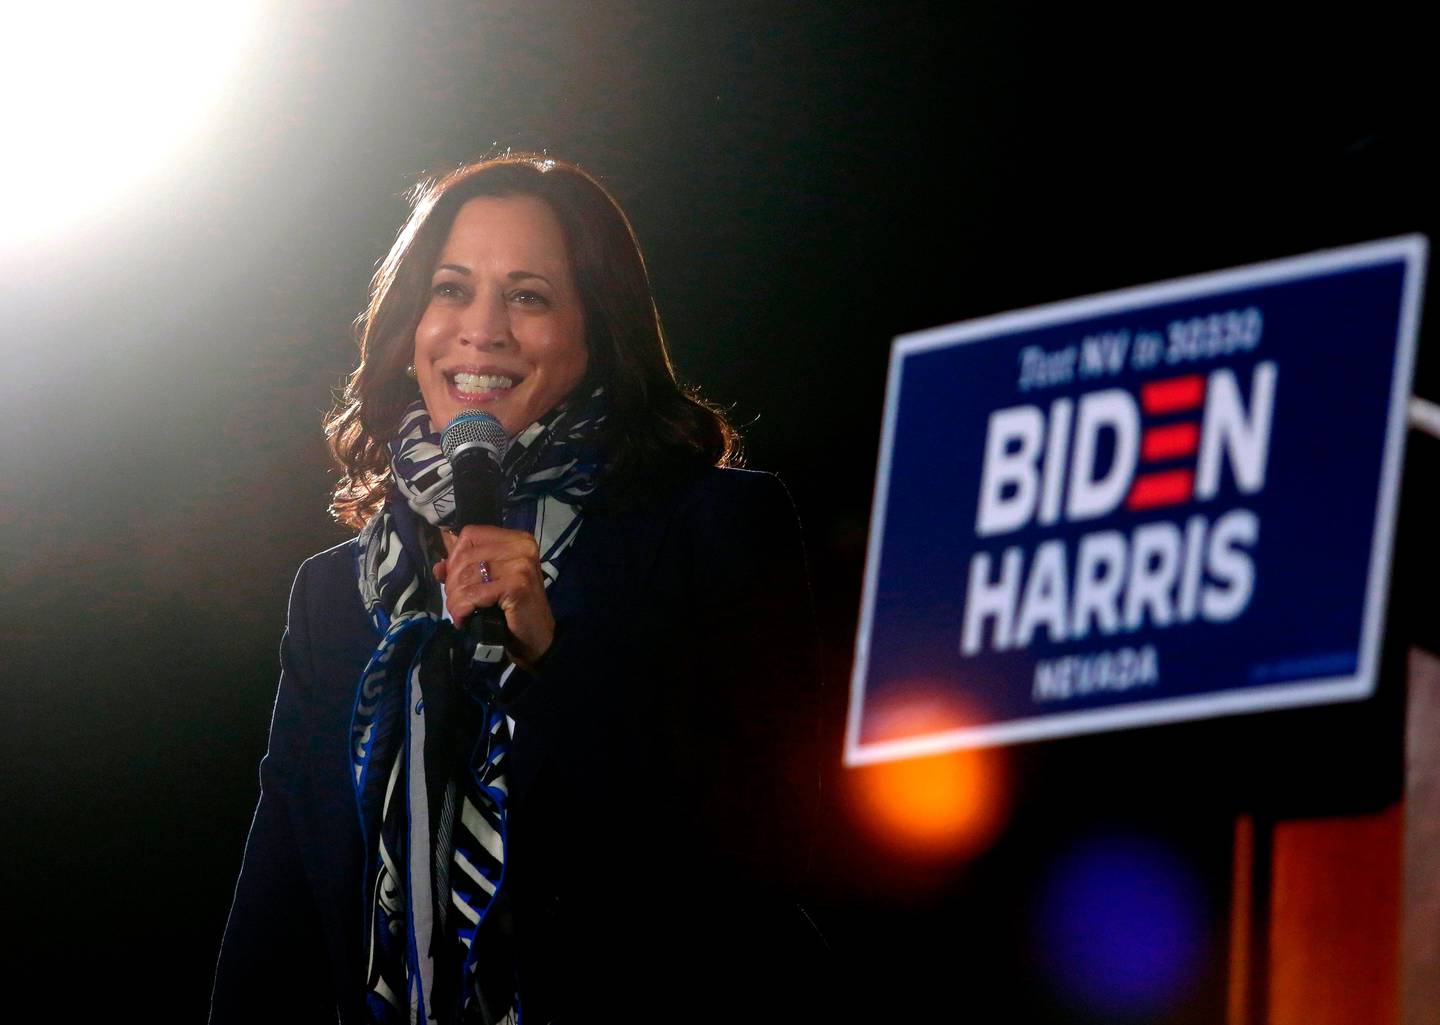 Senator from California and Democratic vice presidential nominee Kamala Harris speak during a voter mobilization event on October 27, 2020, in Las Vegas. (Photo by Ronda Churchill / AFP)